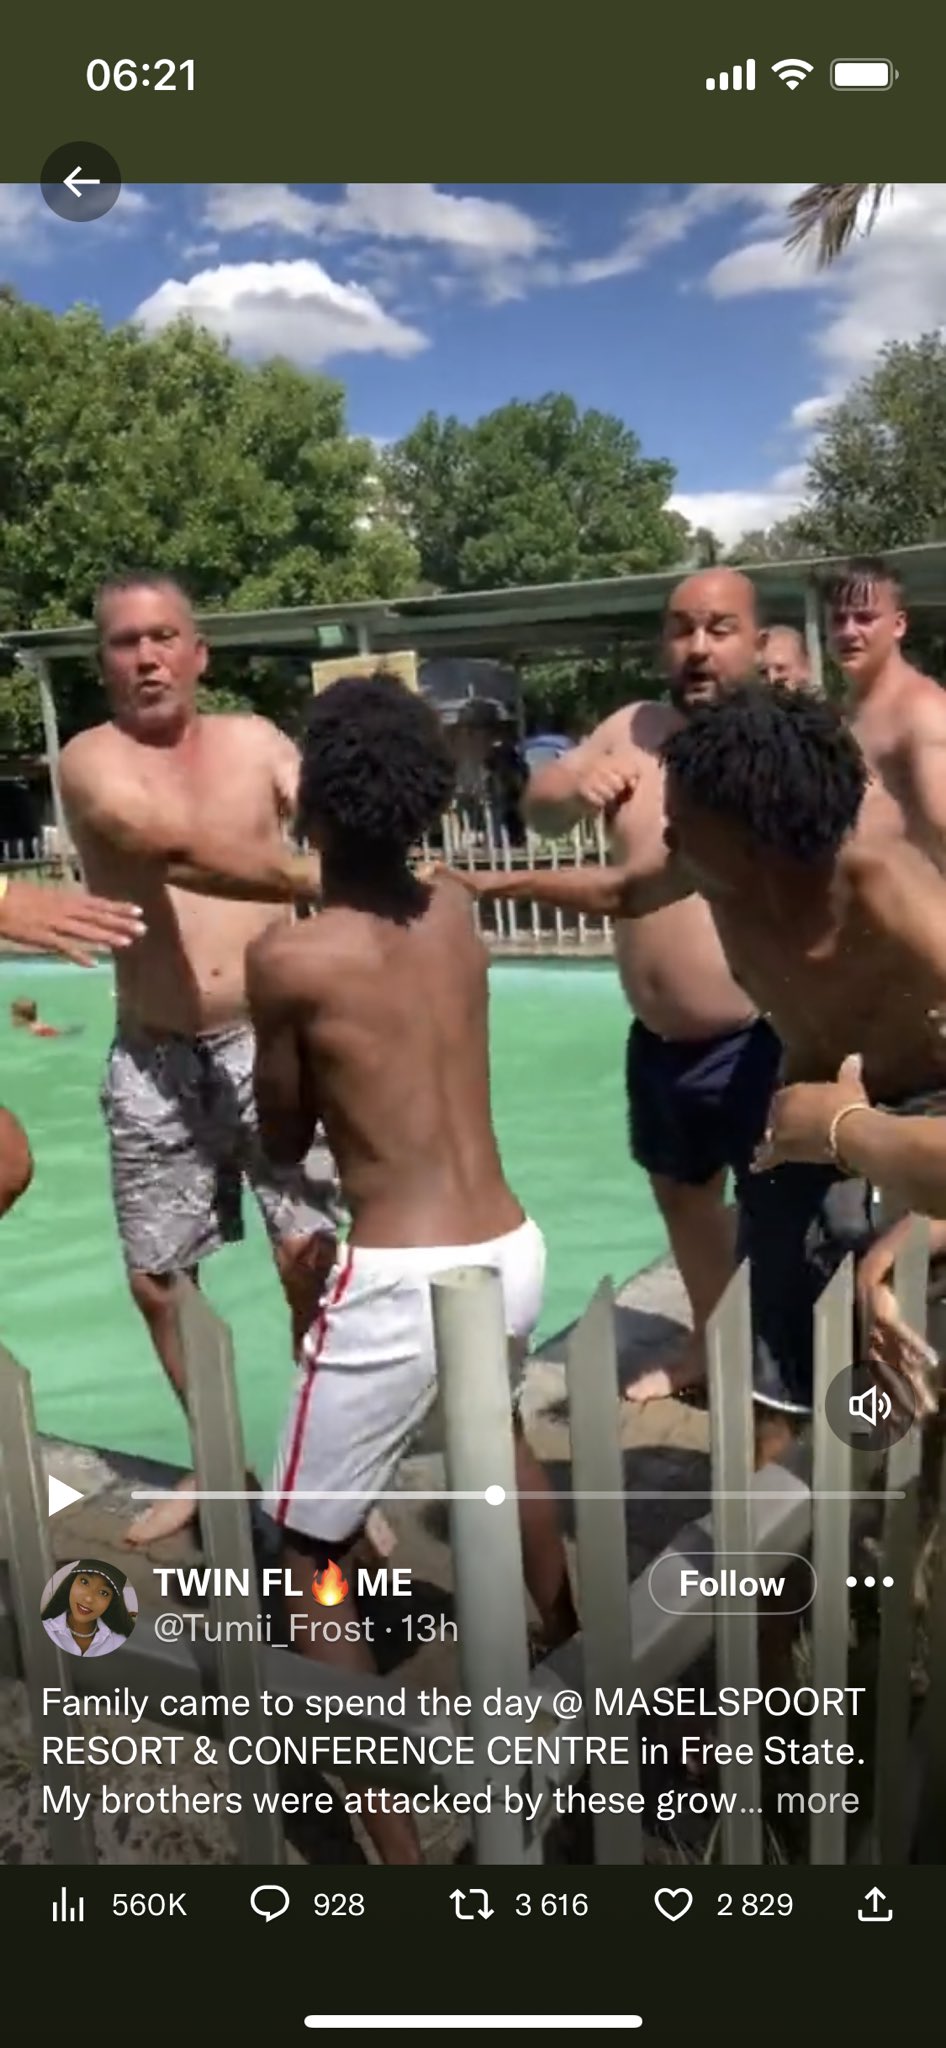 VIDEO: Family’s Christmas marred by alleged racist attack at the Maselspoort Resort in Free State